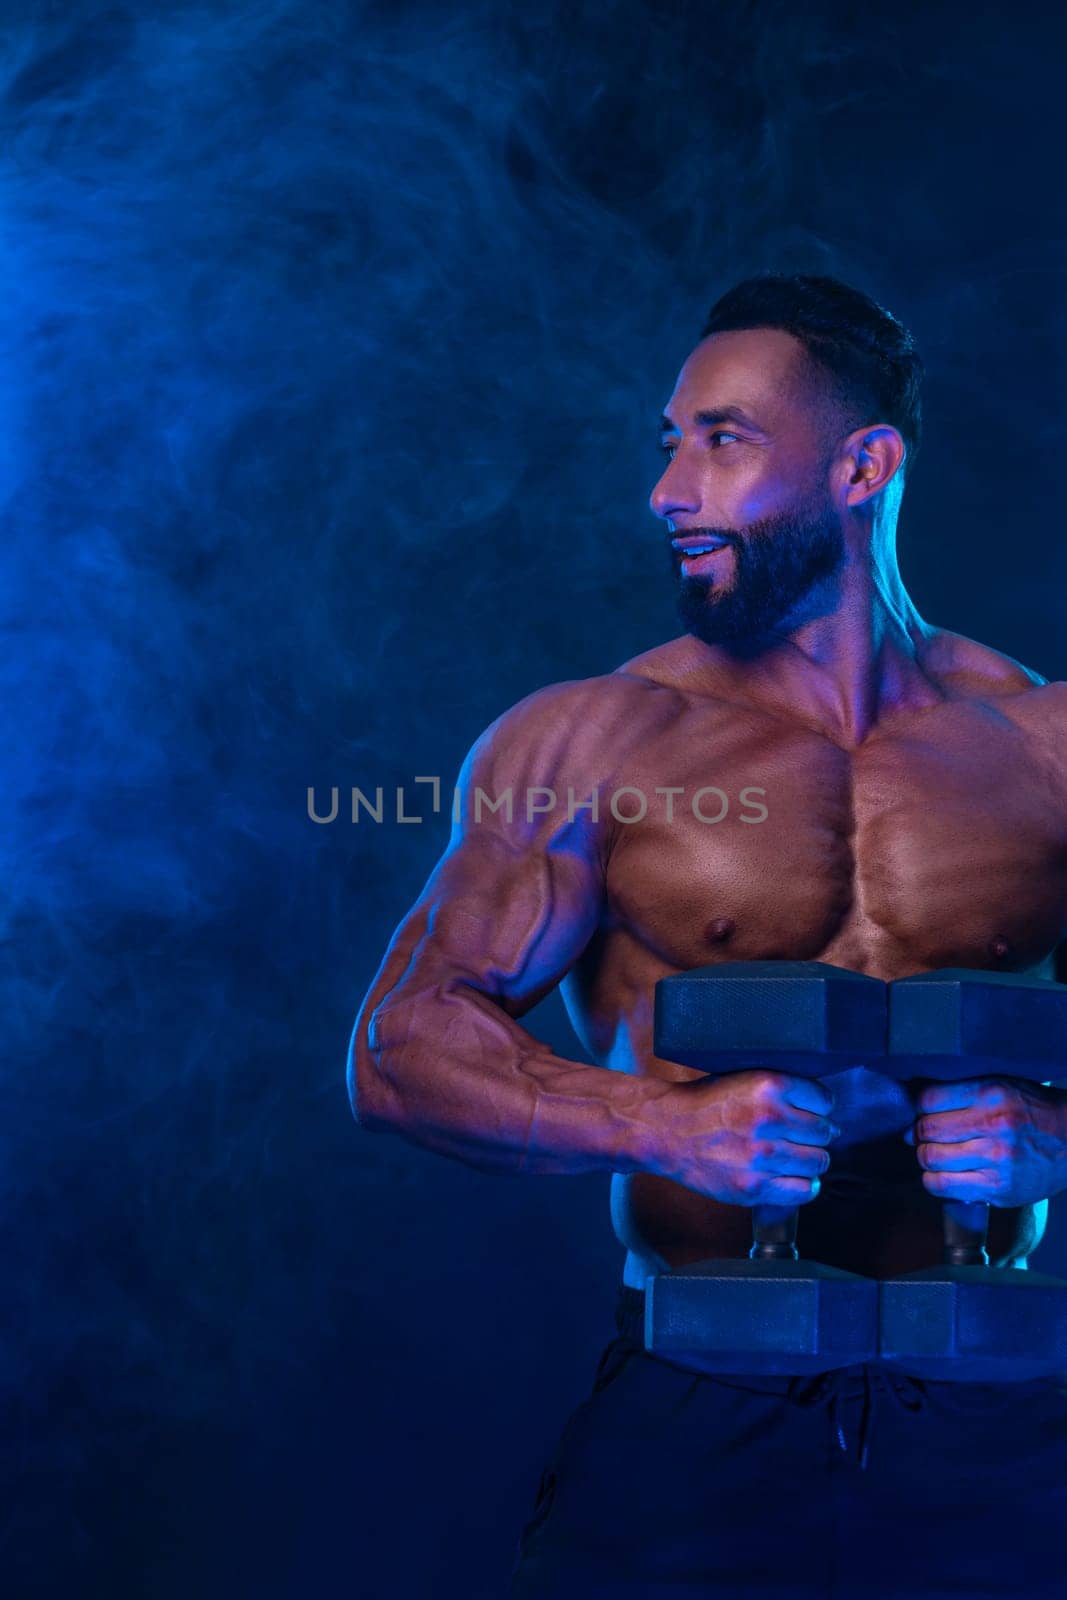 Athlete bodybuilder in neon colors. Fit man posing on black background. Sports concept. Bodybuilding competition. Download, high resolution, photo